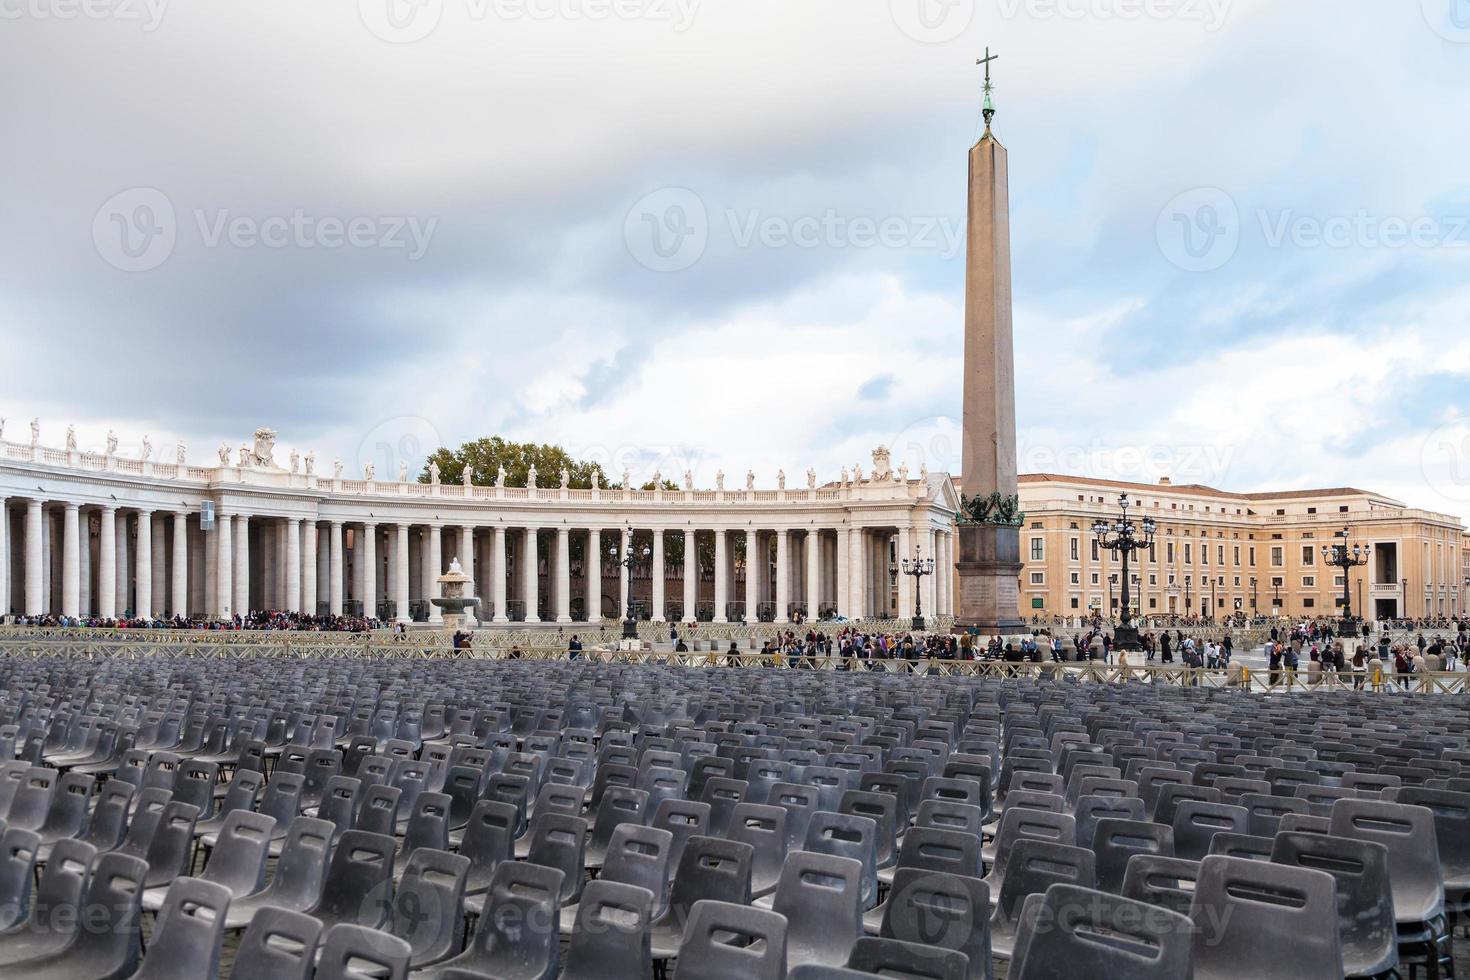 Saint Peter's Square with chairs and obelisk photo